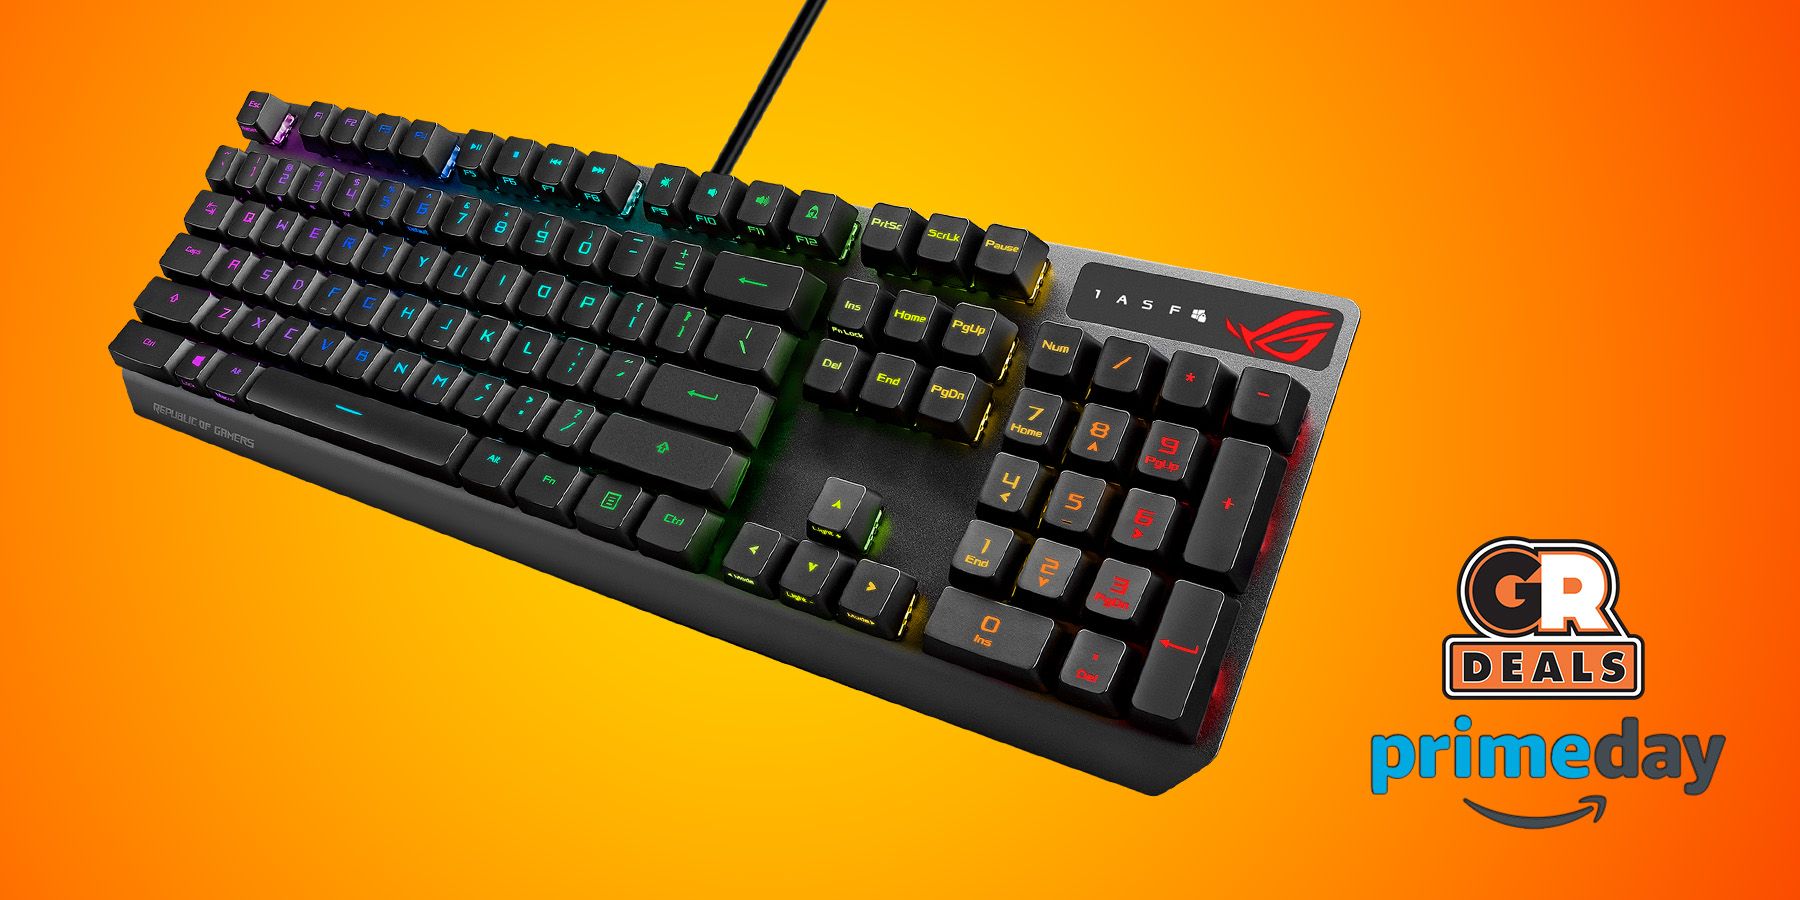 Don't Miss Your Chance to Get the Asus ROG Strix Scope RX Gaming Keyboard  at 31% Prime Day Discount